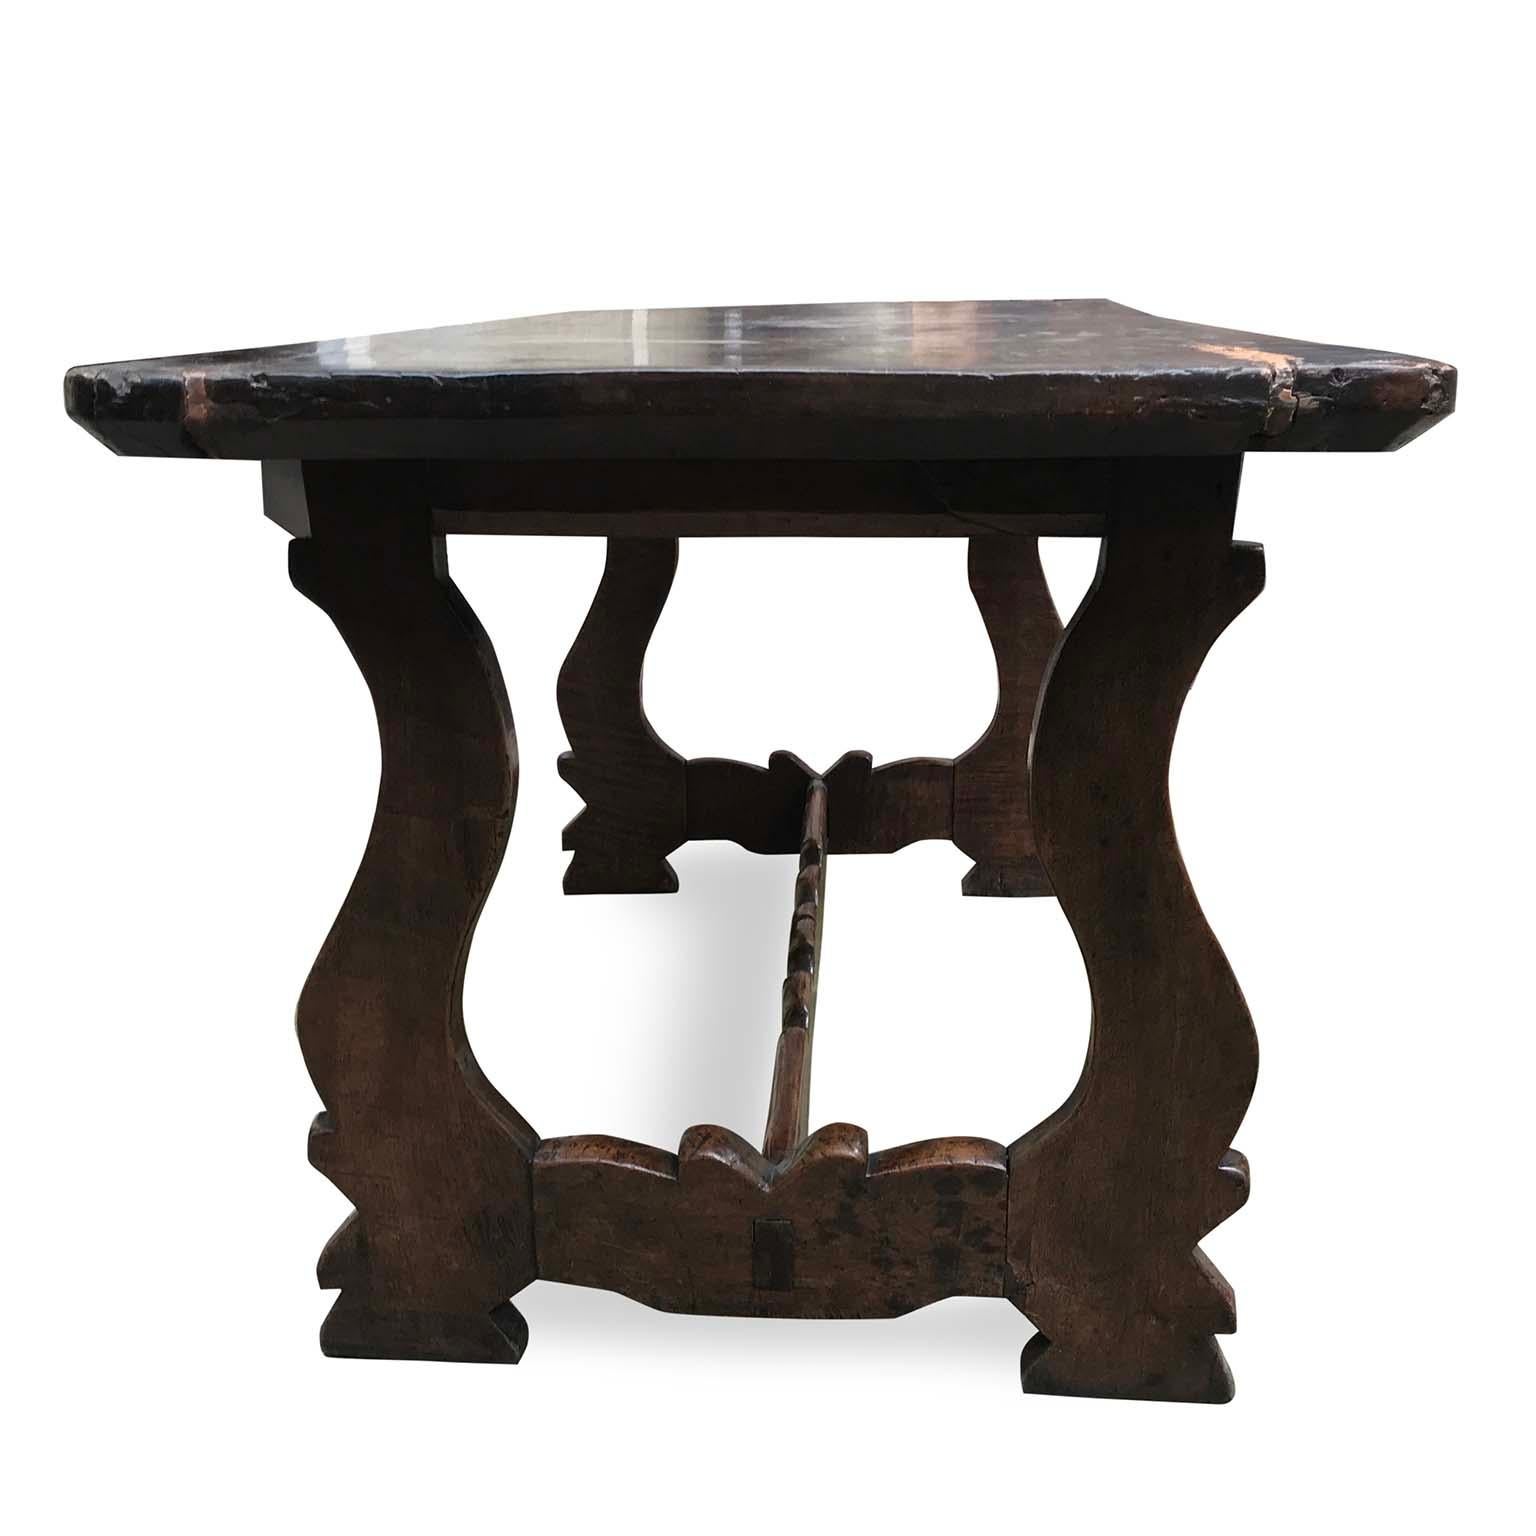 18th Century Italian Fratino Table with Lyre Legs Solid Walnut Rectangular Table For Sale 1